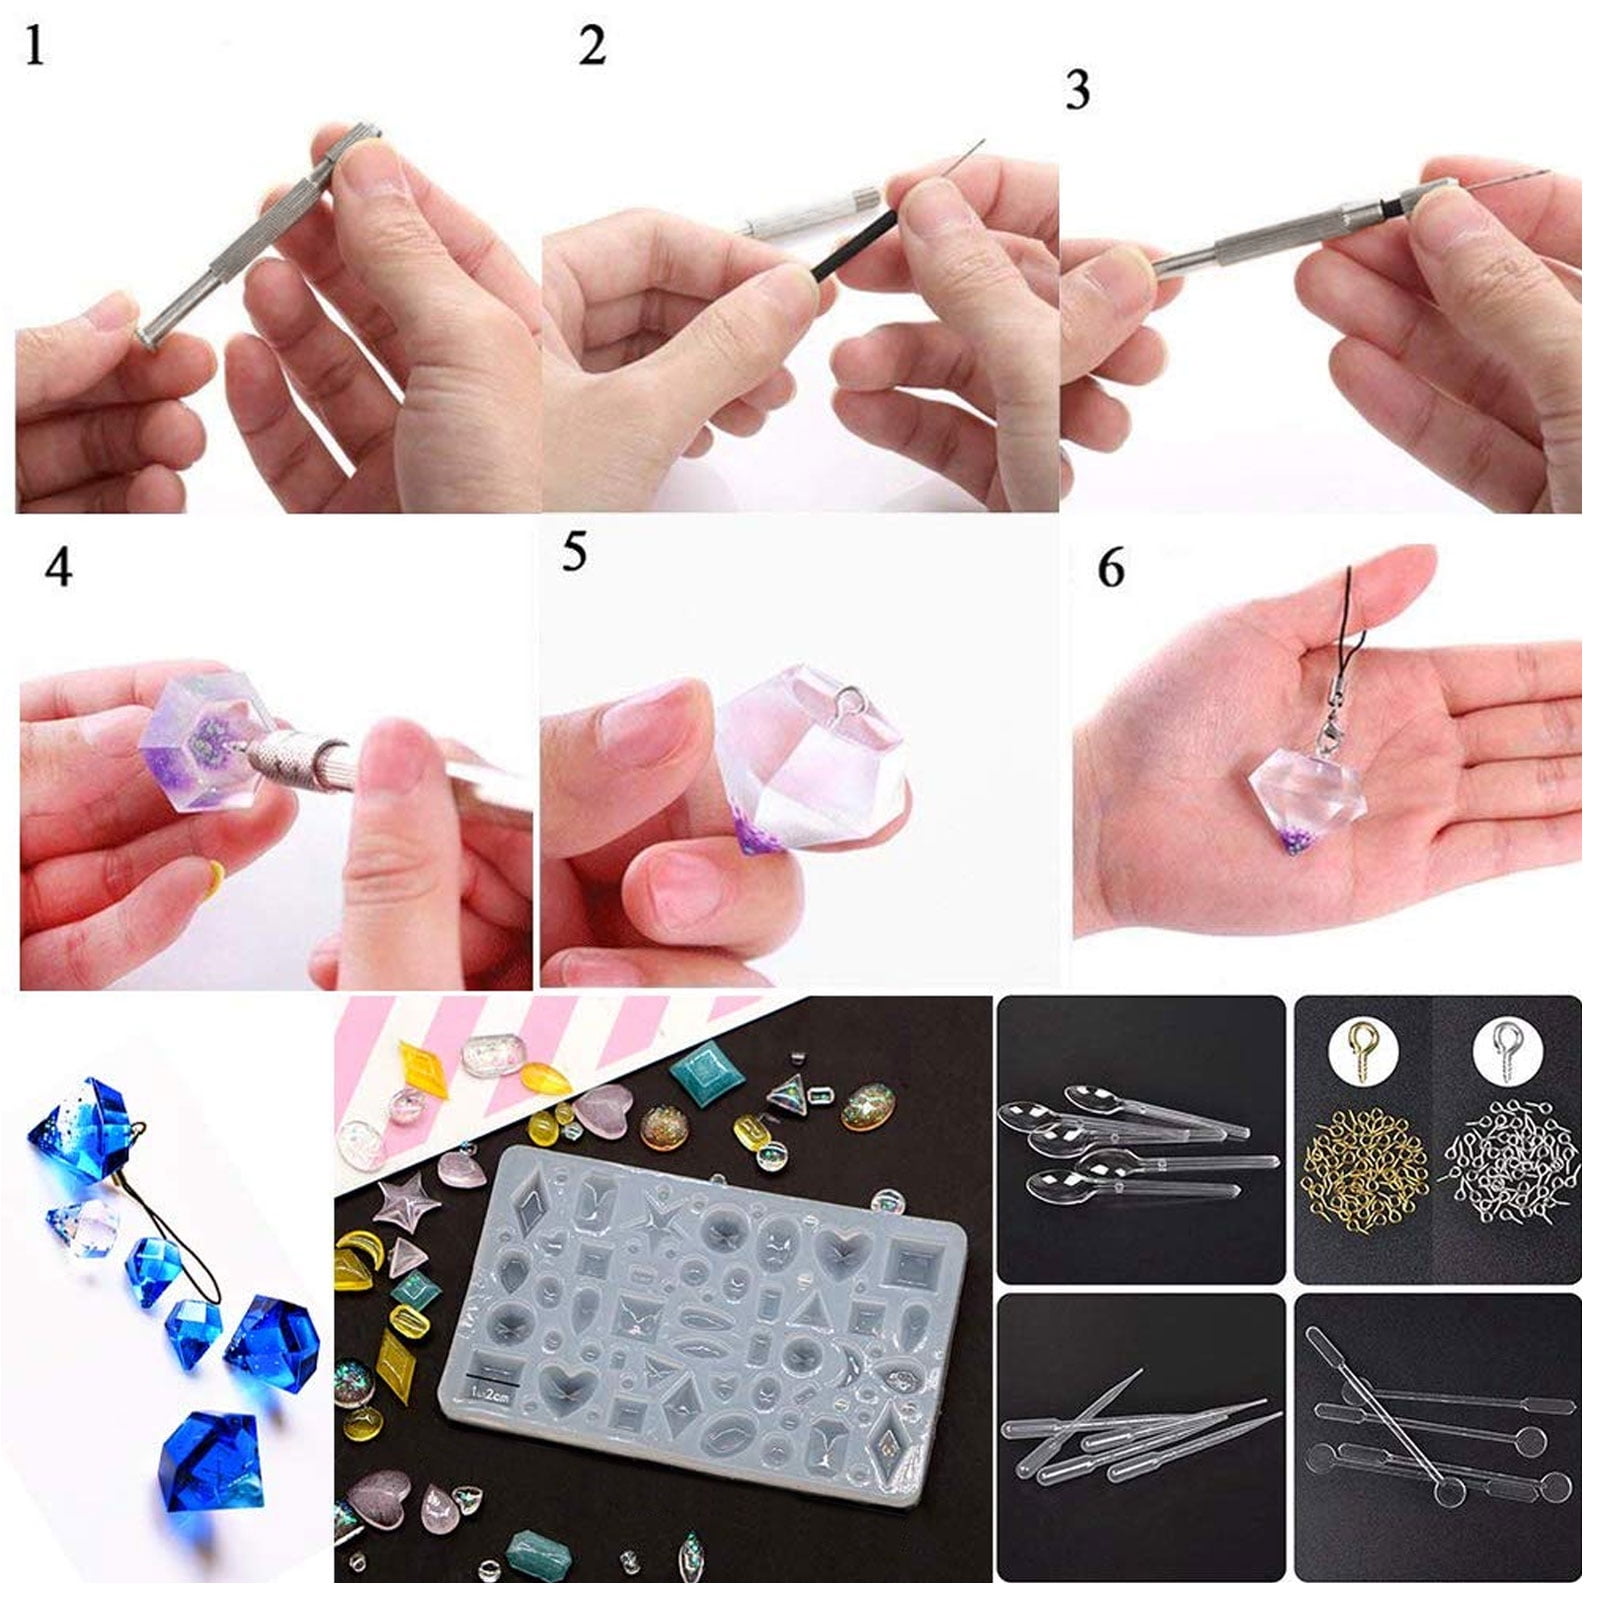 DIY Jewely Cylinders Stripe Silicone Mold Carft Tool for Making Resin  Pendant 3 Pcs/Set Multifunction DIY Jewelry Silicone Molds for Pendant  Making Or